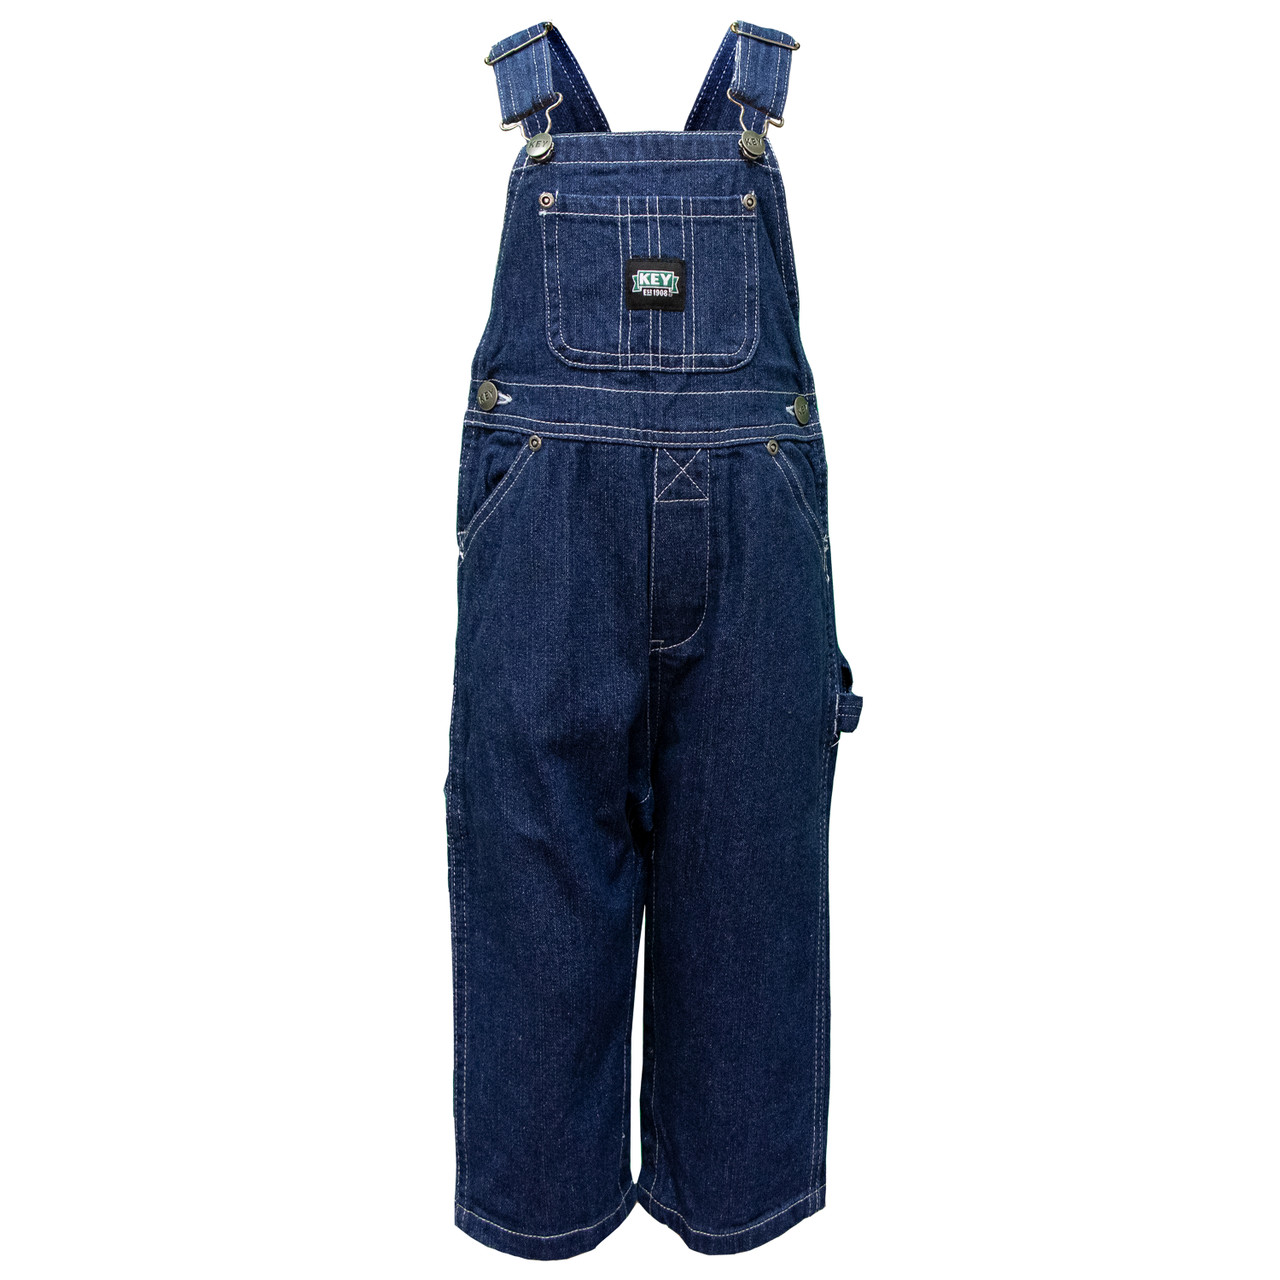 Made in USA Youth Boys Blue Denim Overall, American Made Overall